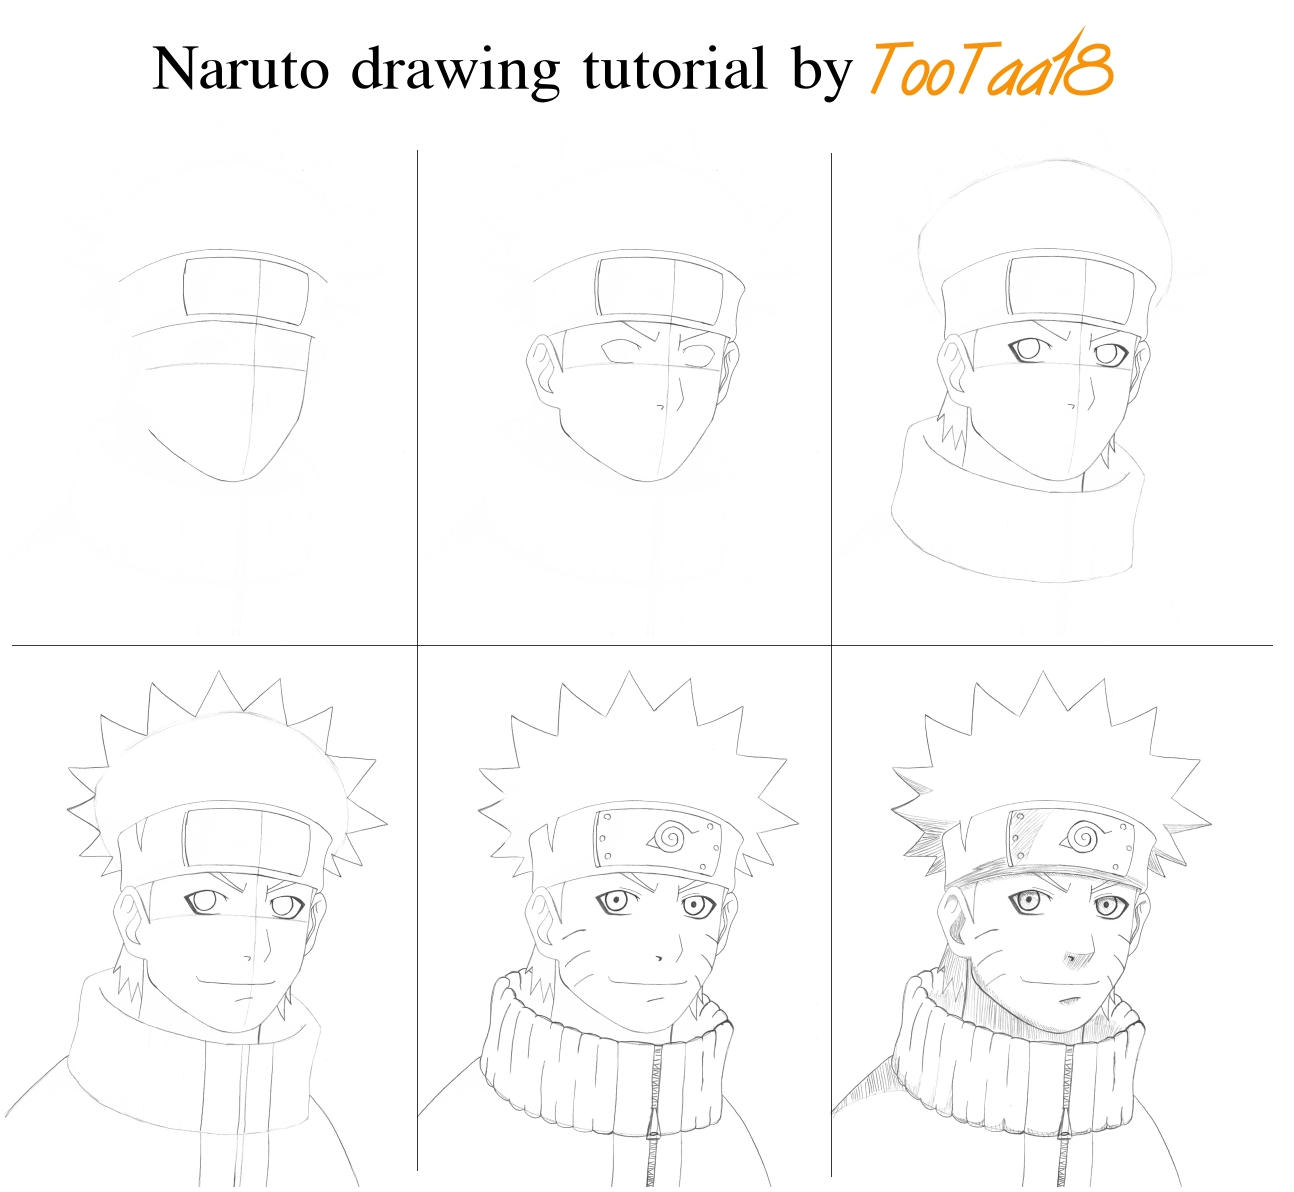 Amazing How To Draw Naruto Characters Tutorial of all time Check it out now 